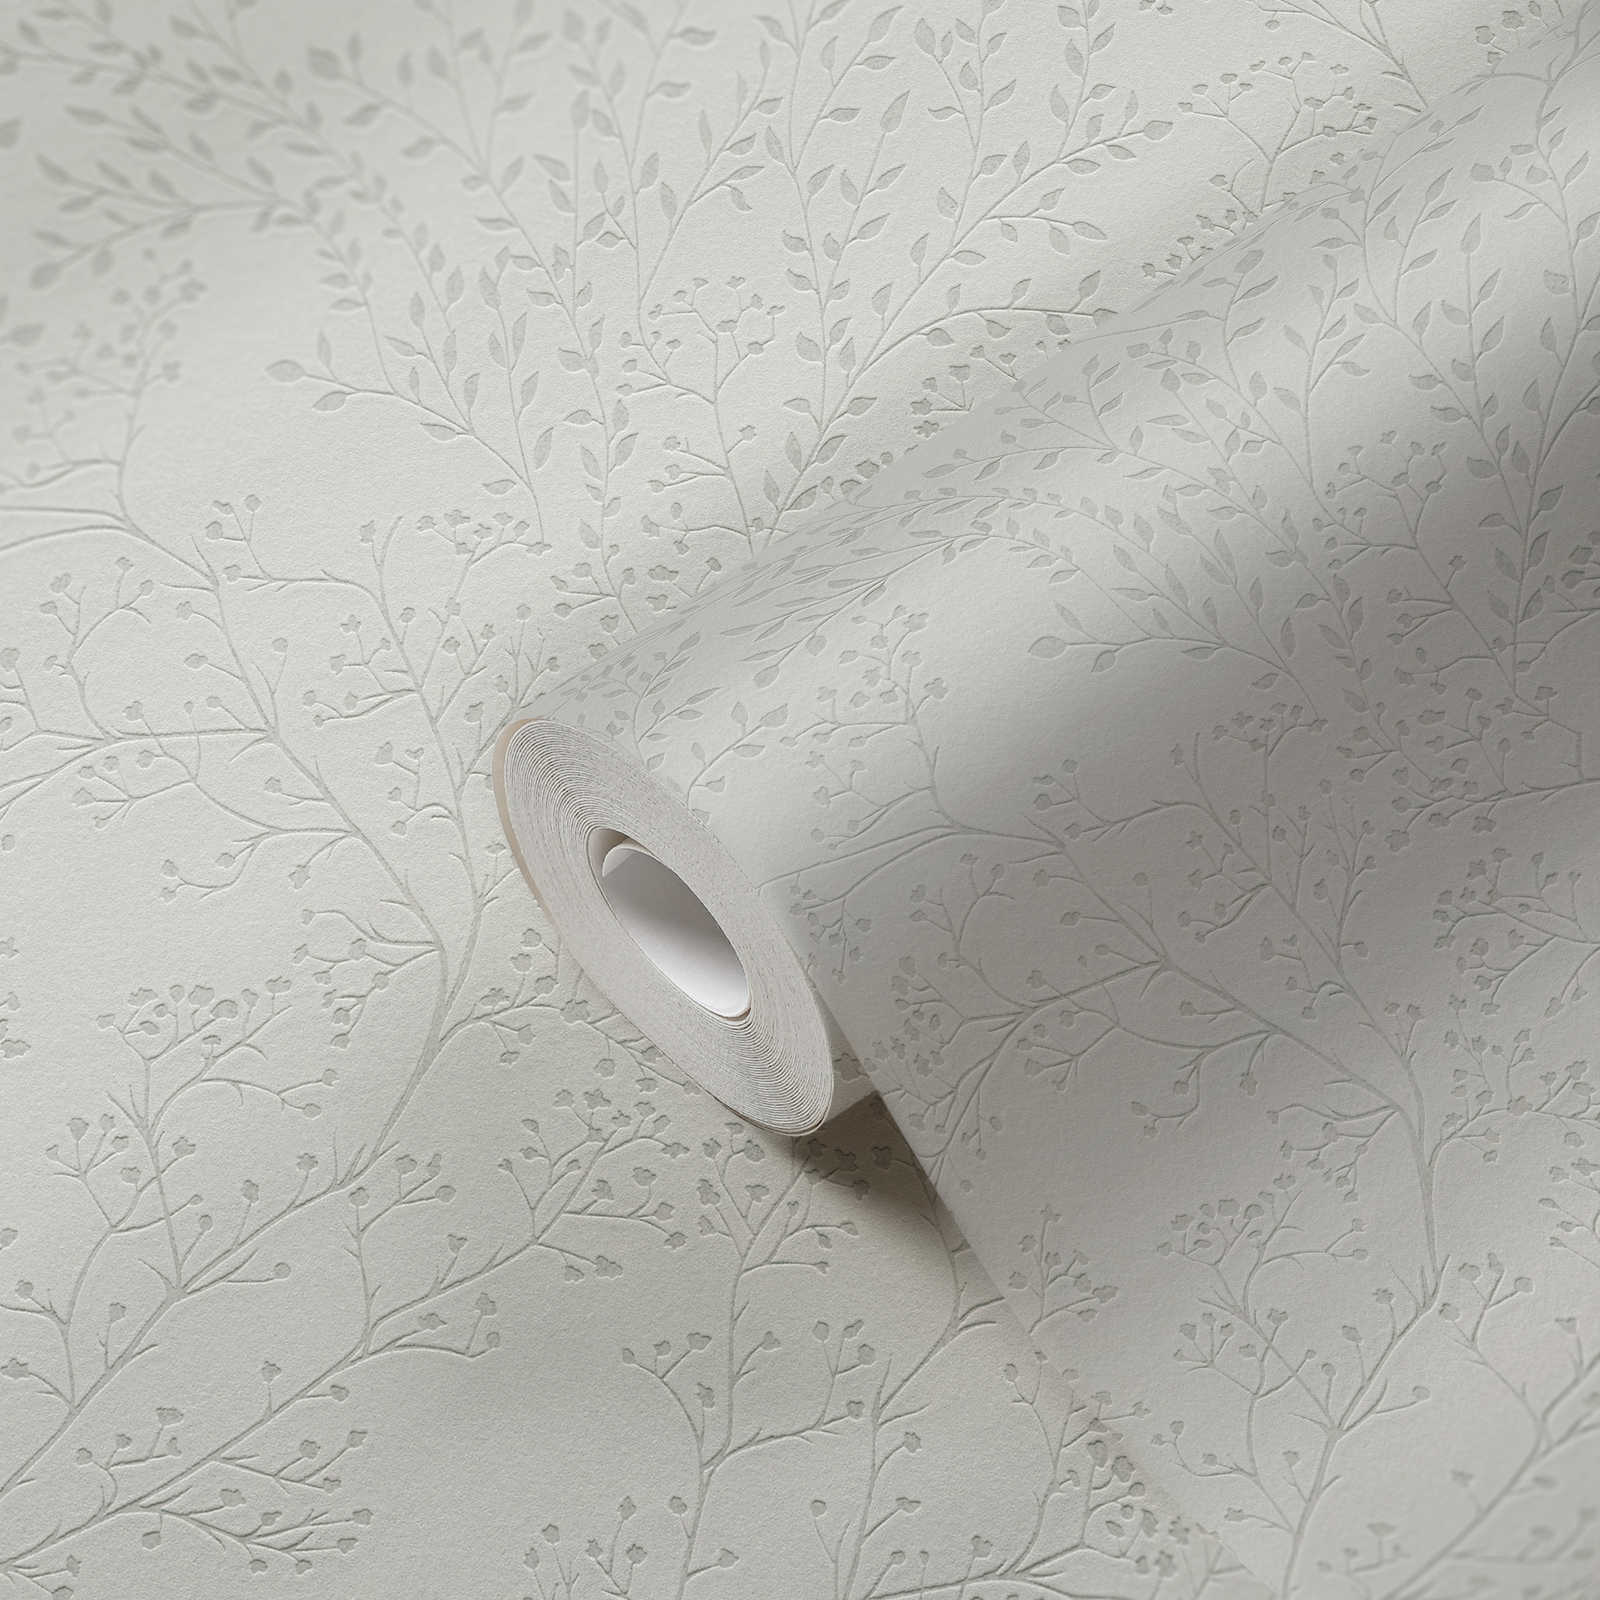             Plain wallpaper grey with leaves pattern, gloss & texture effect
        